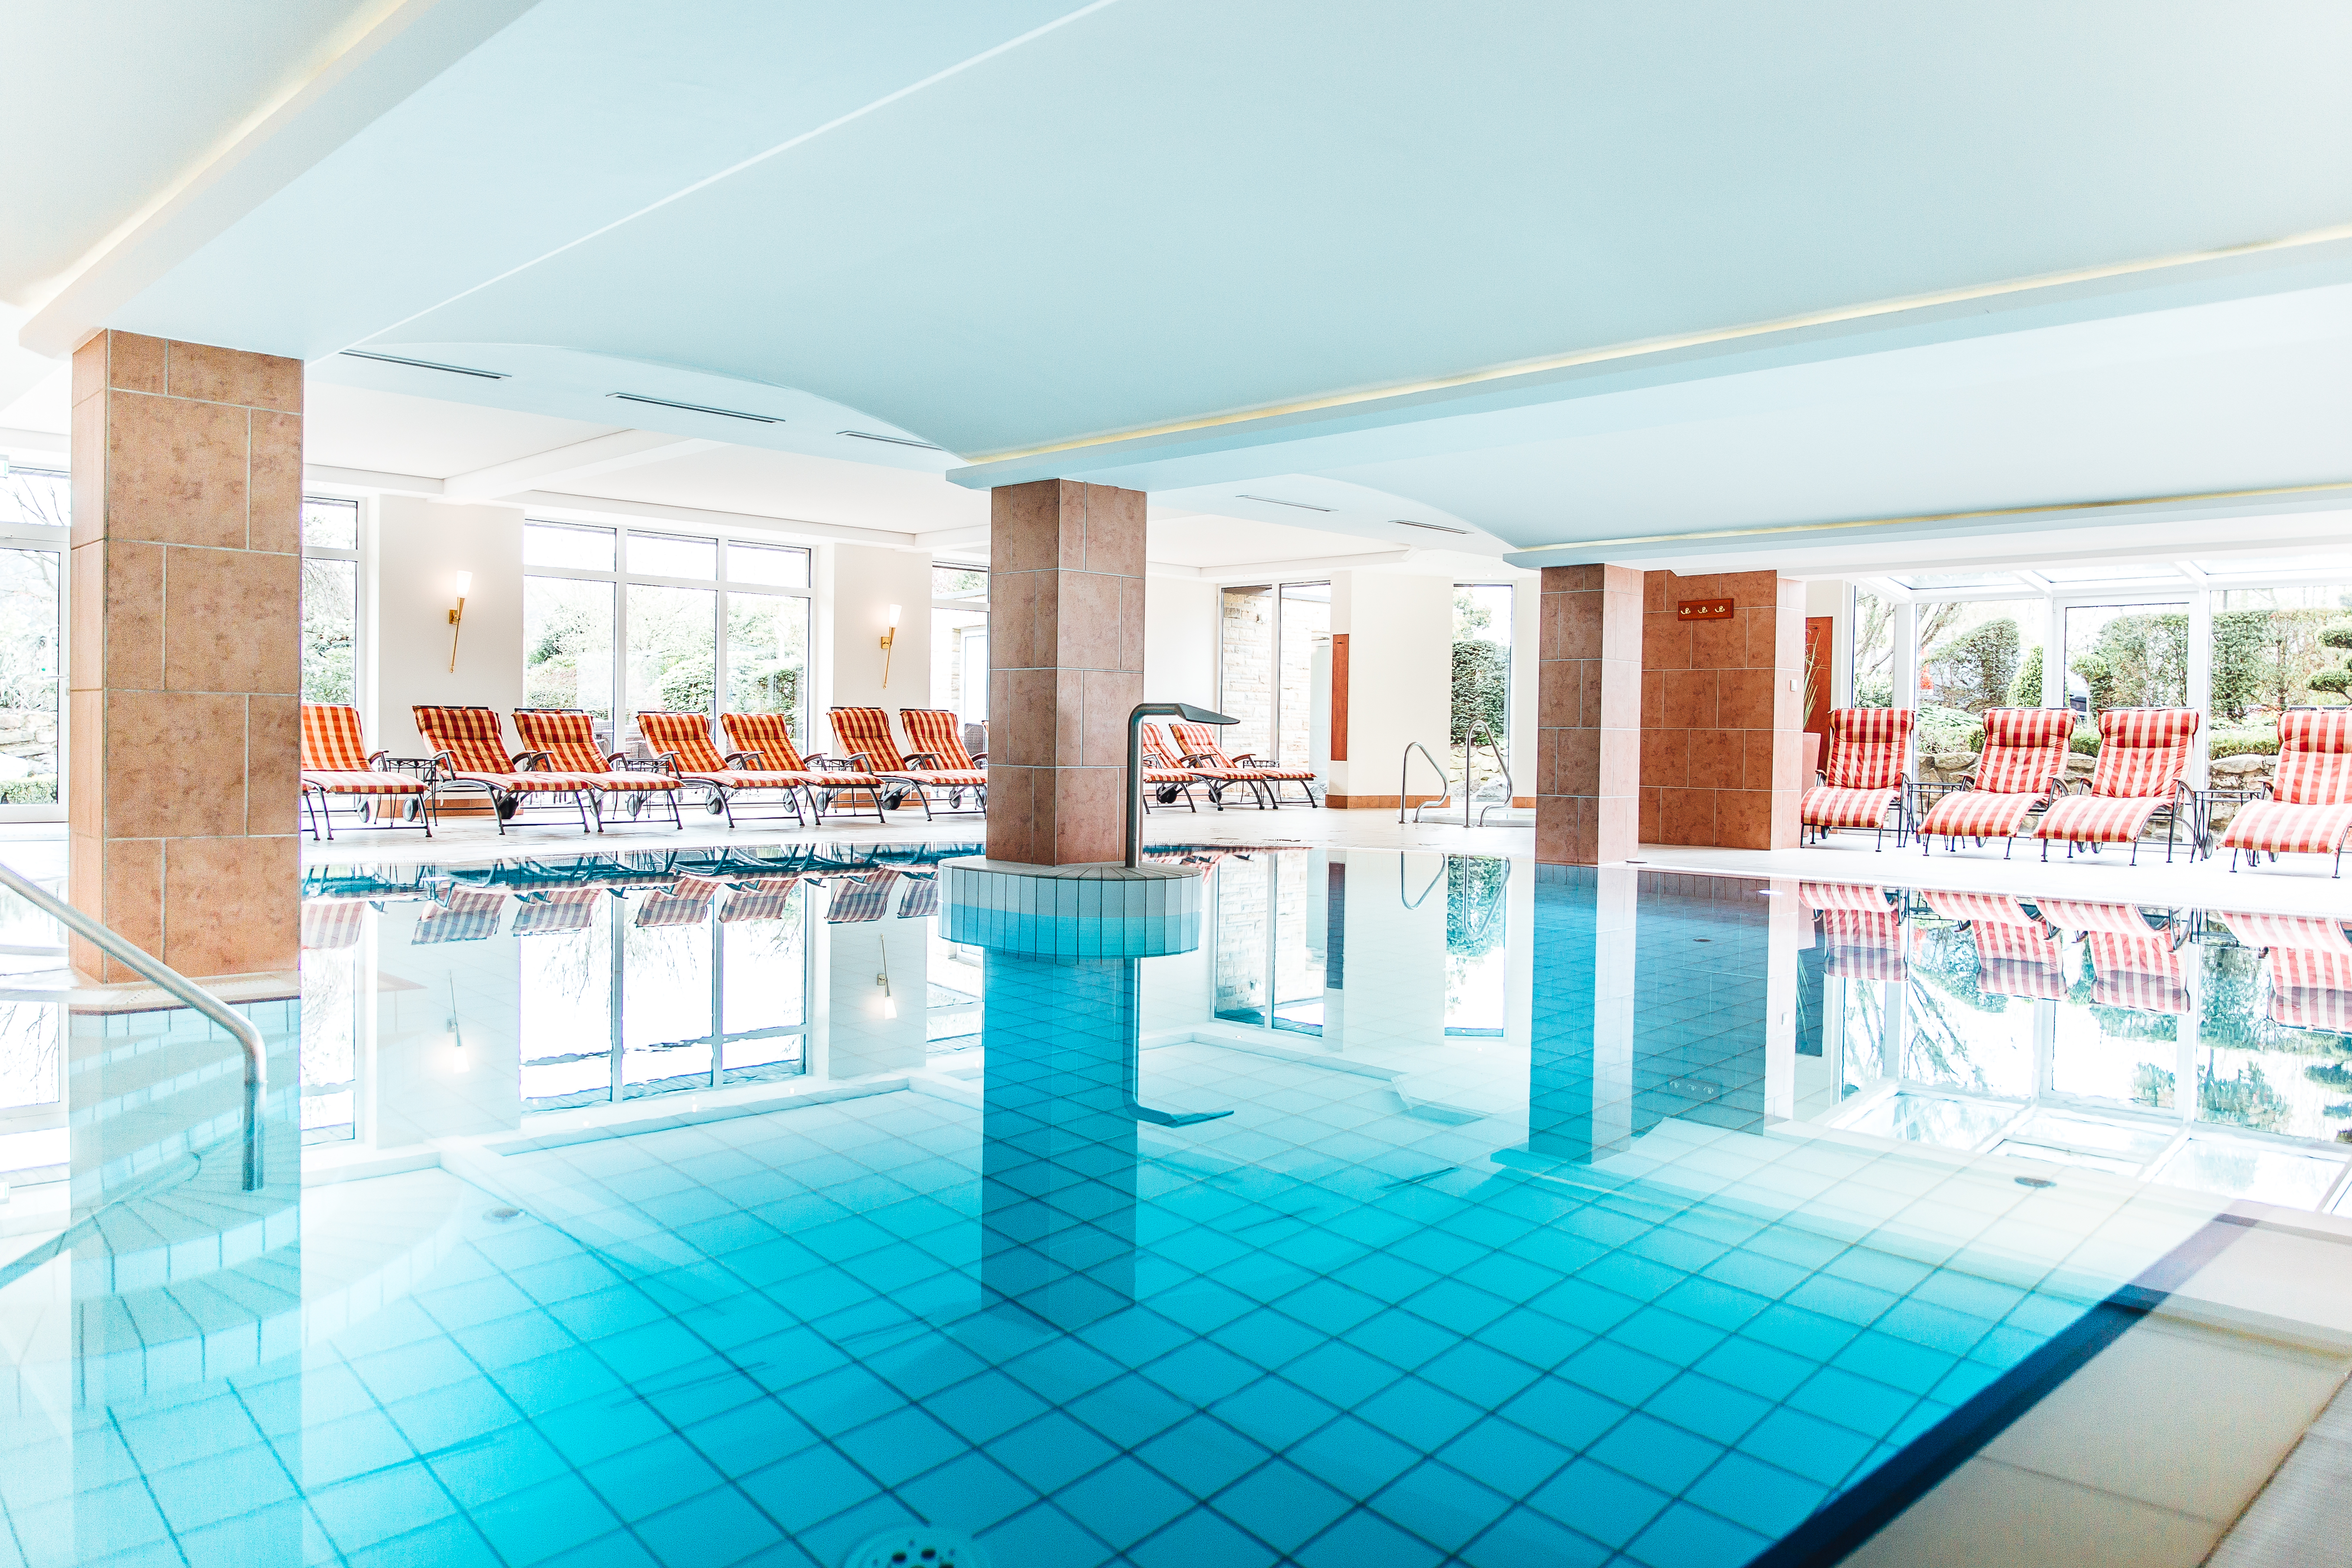 4 Sterne Superior Hotel Teutoburger Wald Schwimmbad